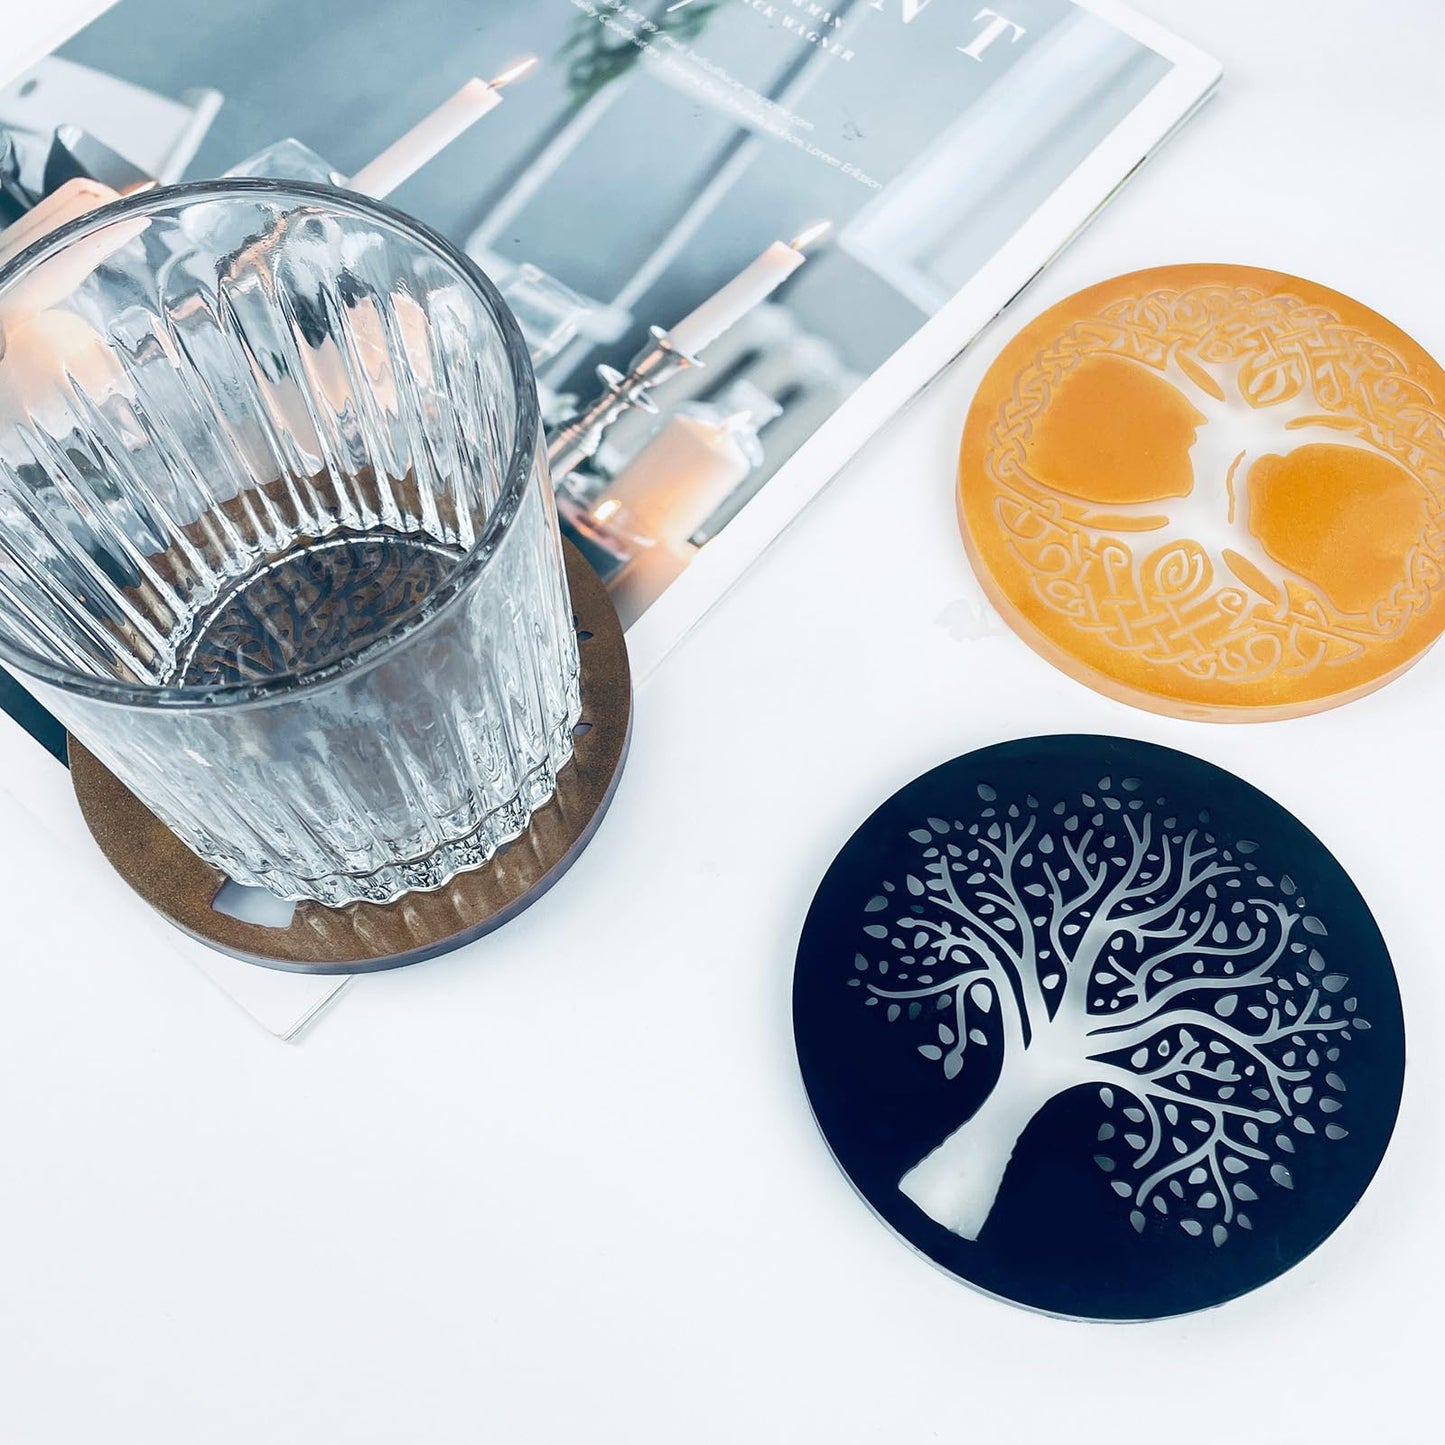 2pcs Tree of Life Coaster Silicone Molds, Tree of Life Epoxy Resin Casting Mold for Drink Coasters, Cup Mats, Home Decor, Handmade Crafts